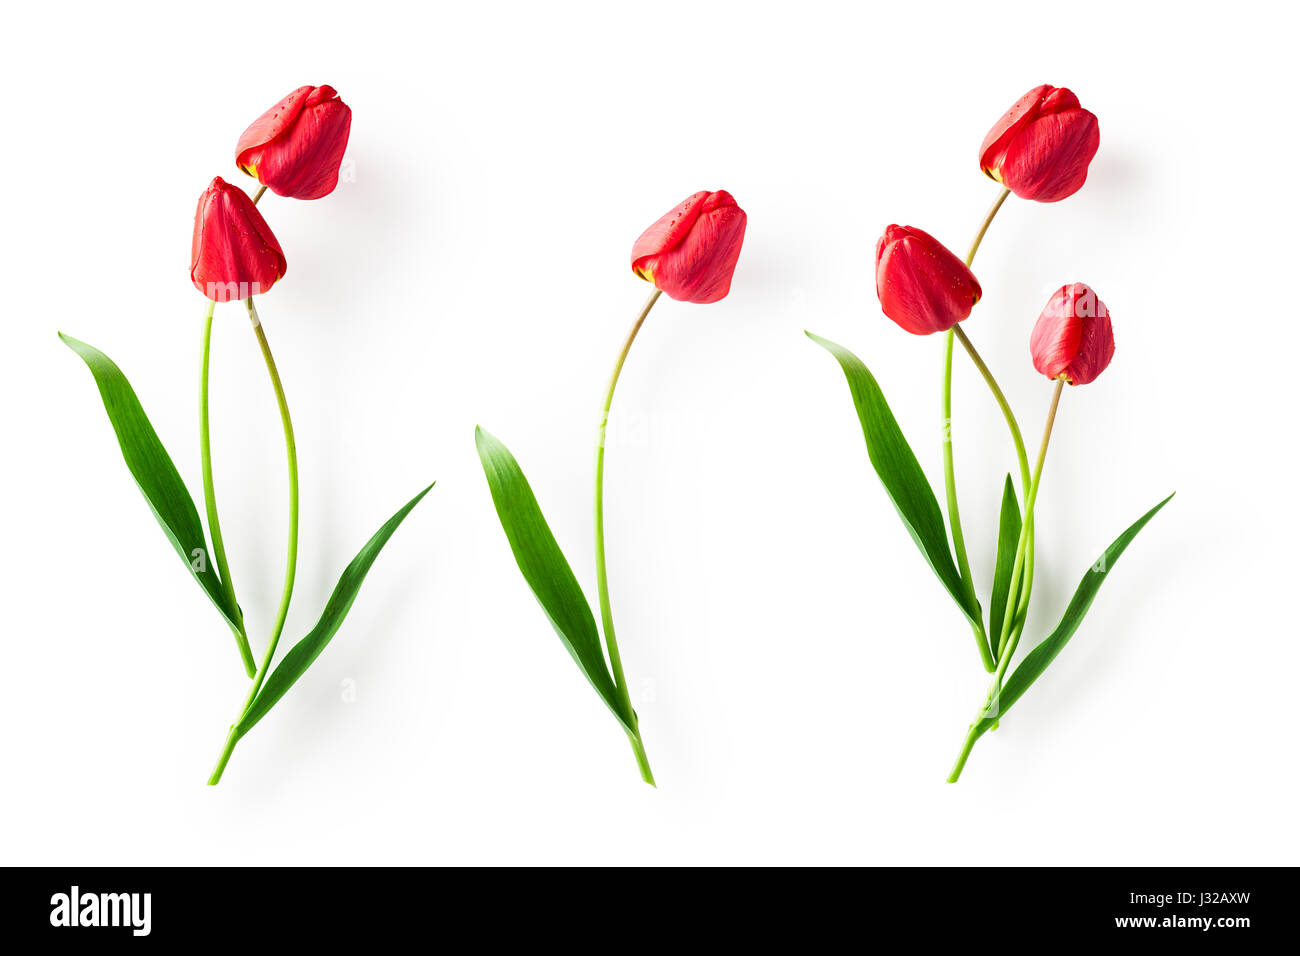 Red tulip flower with leaves collection isolated on white background. Spring garden flowers Stock Photo